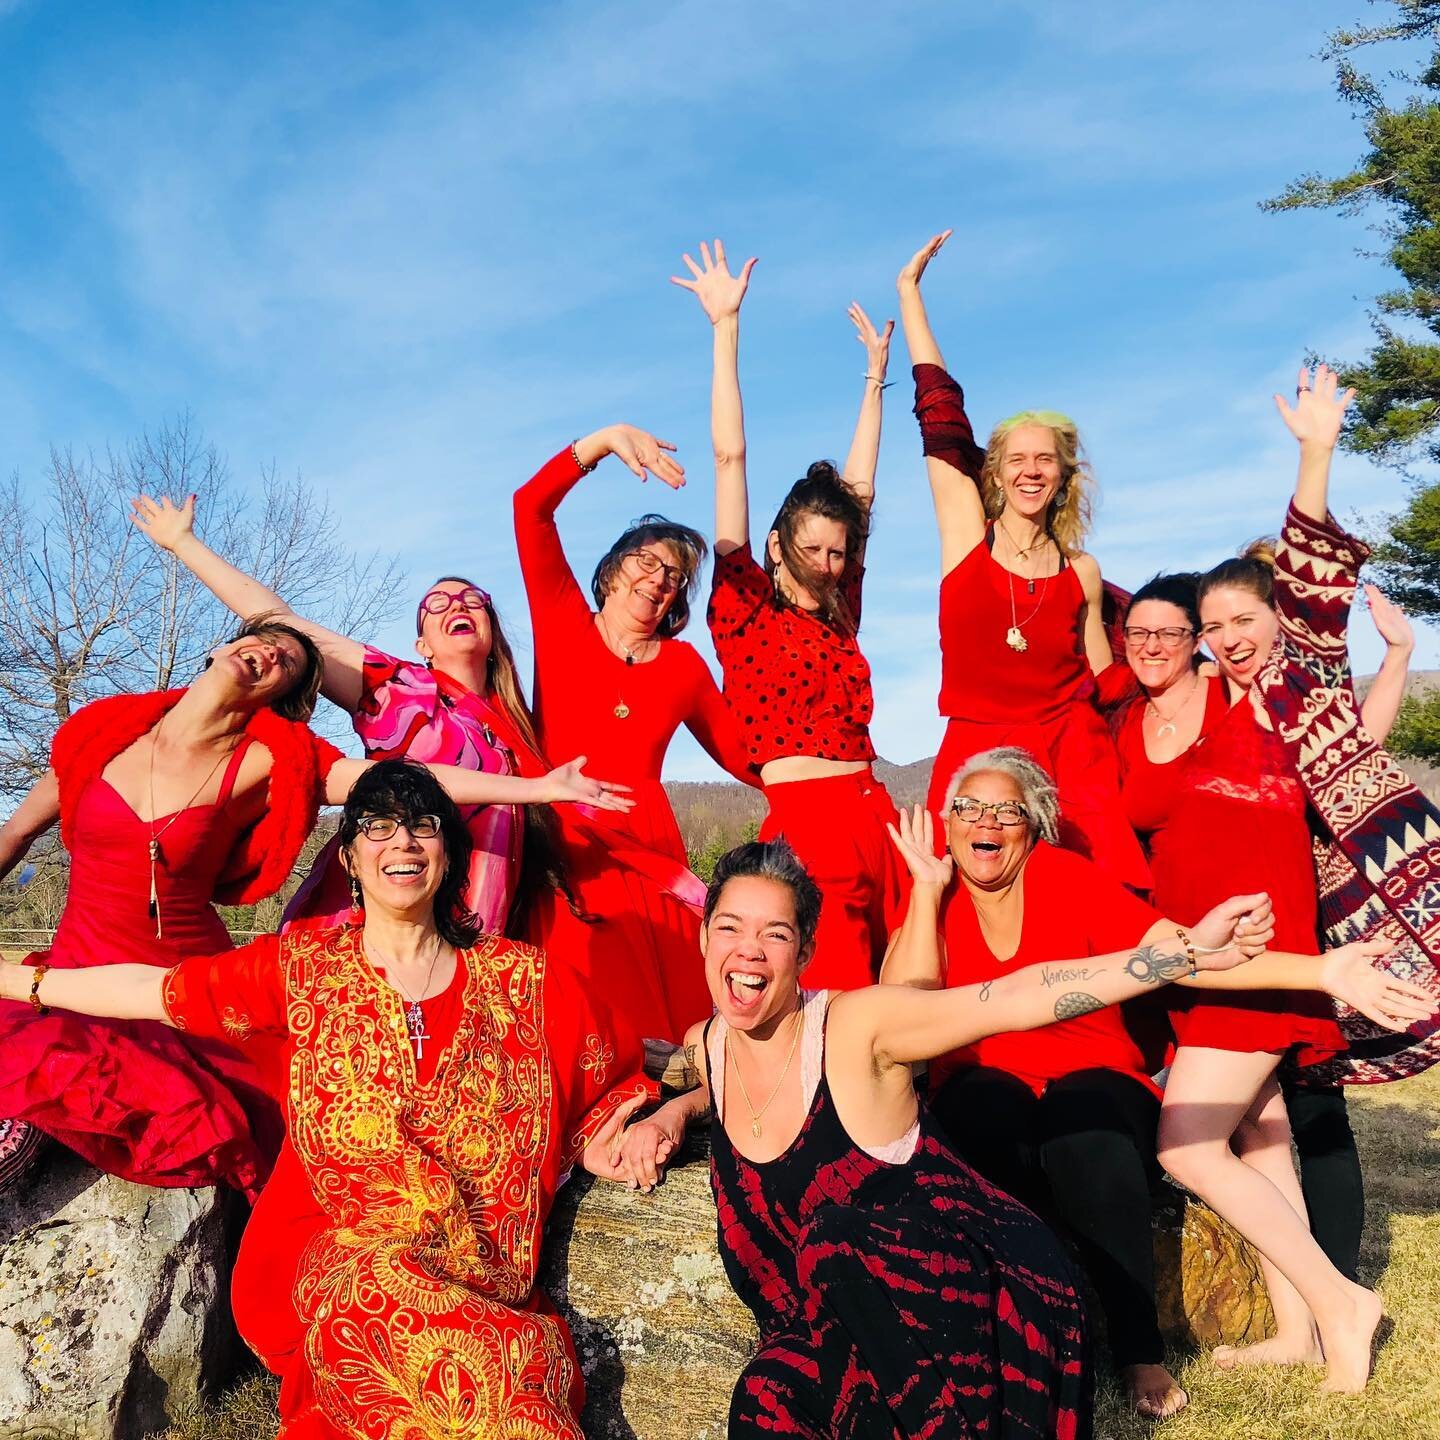 WOW!!!! We just completed a multi-year journey of moving through 4 rounds of our Sovereign Sisters Rising&trade; 7 month Initiation into the Fierce &amp; Sacred Feminine! What a profound and life altering journey this has been for us all!
..
..
I'm s